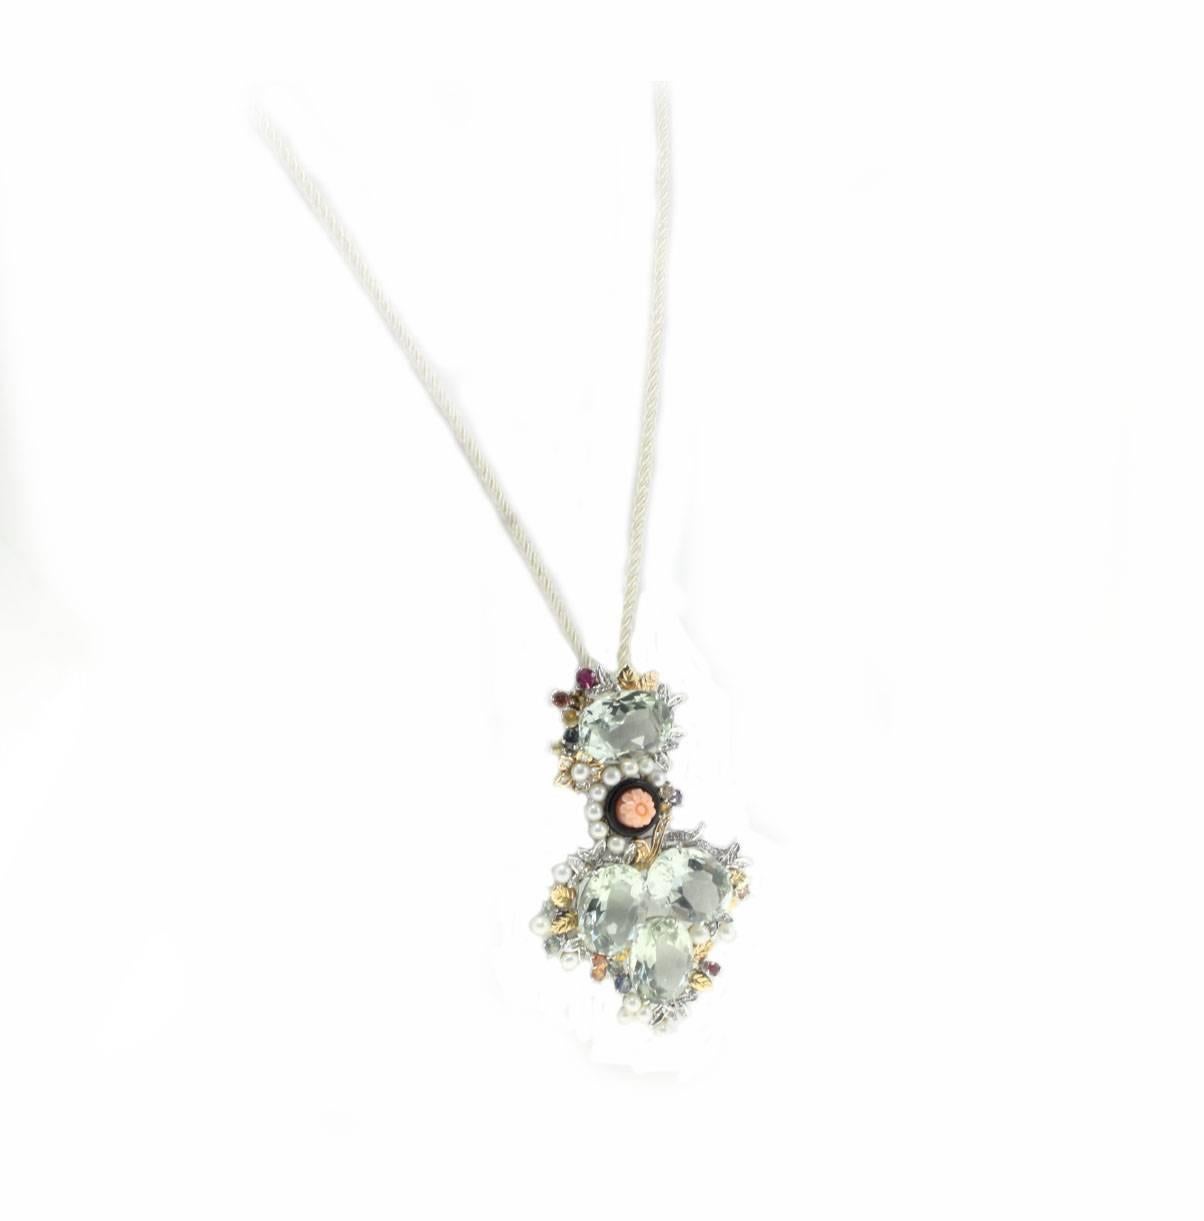 Retro Green Amethysts, Diamonds, Engraved Pink Coral, Onyx, Sapphires, Pearls, Gold Pendant